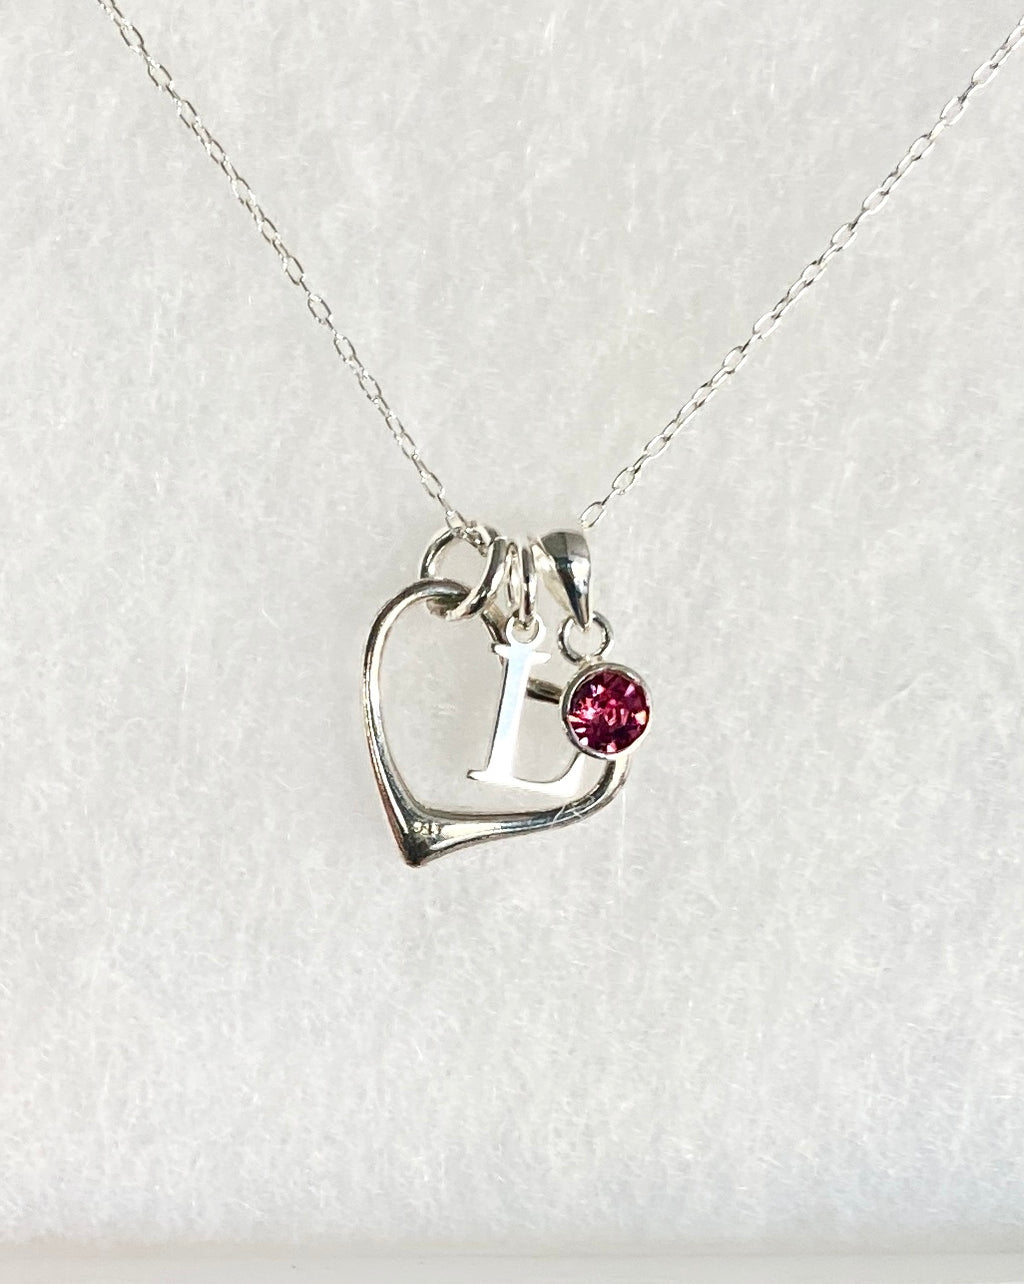 Folk heart, initial and birthstone necklace